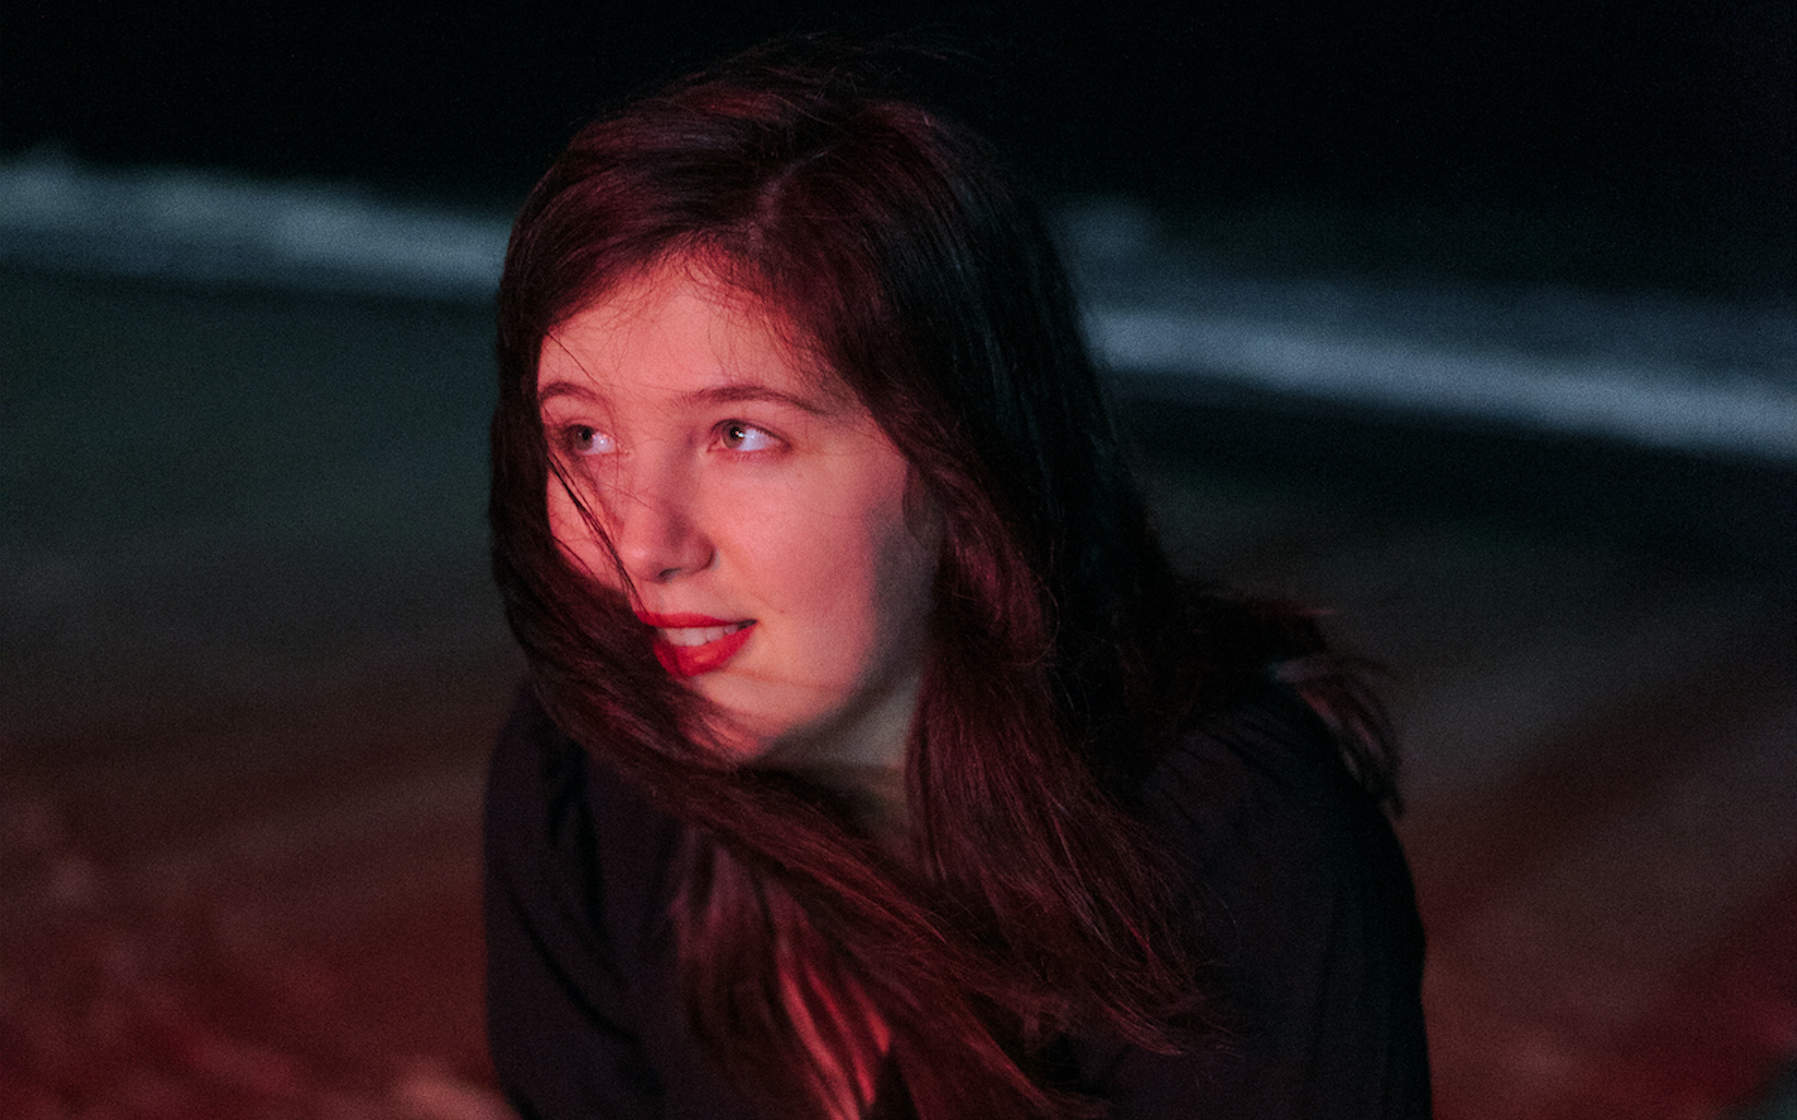 LUCY DACUS – Thumbs up!